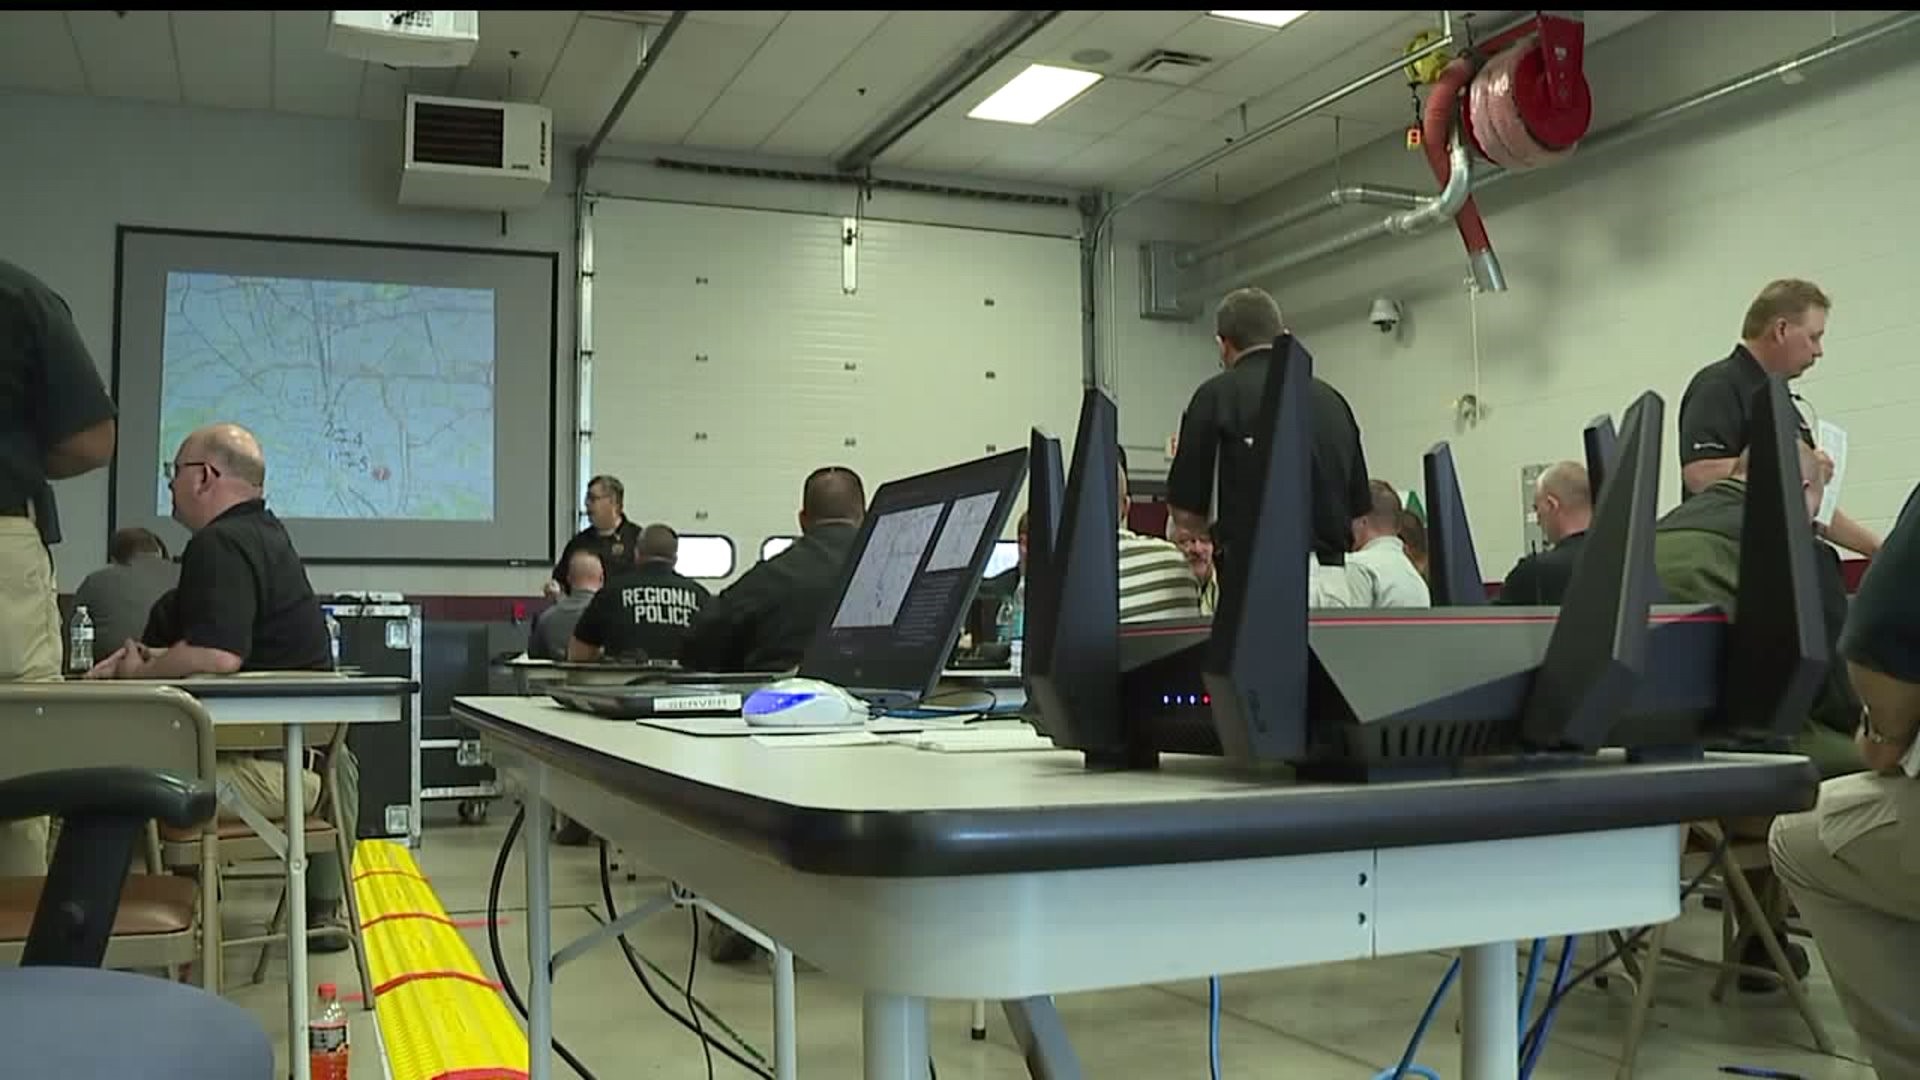 Emergency responders train for active shooter situations using technology